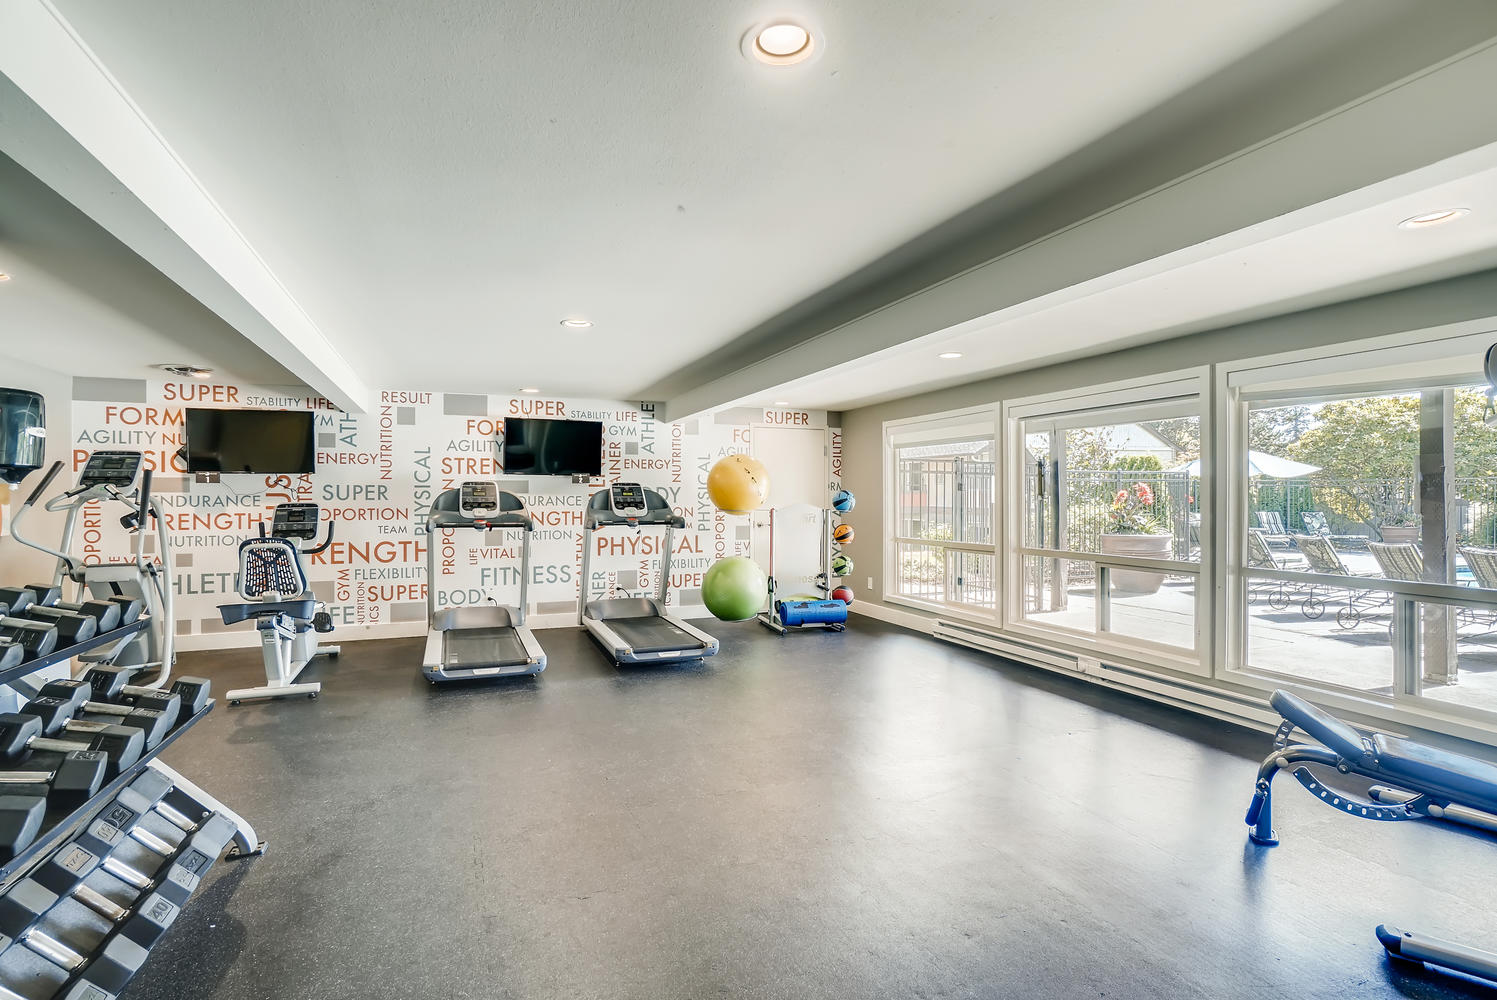 Indoor gym with all the gym equipment